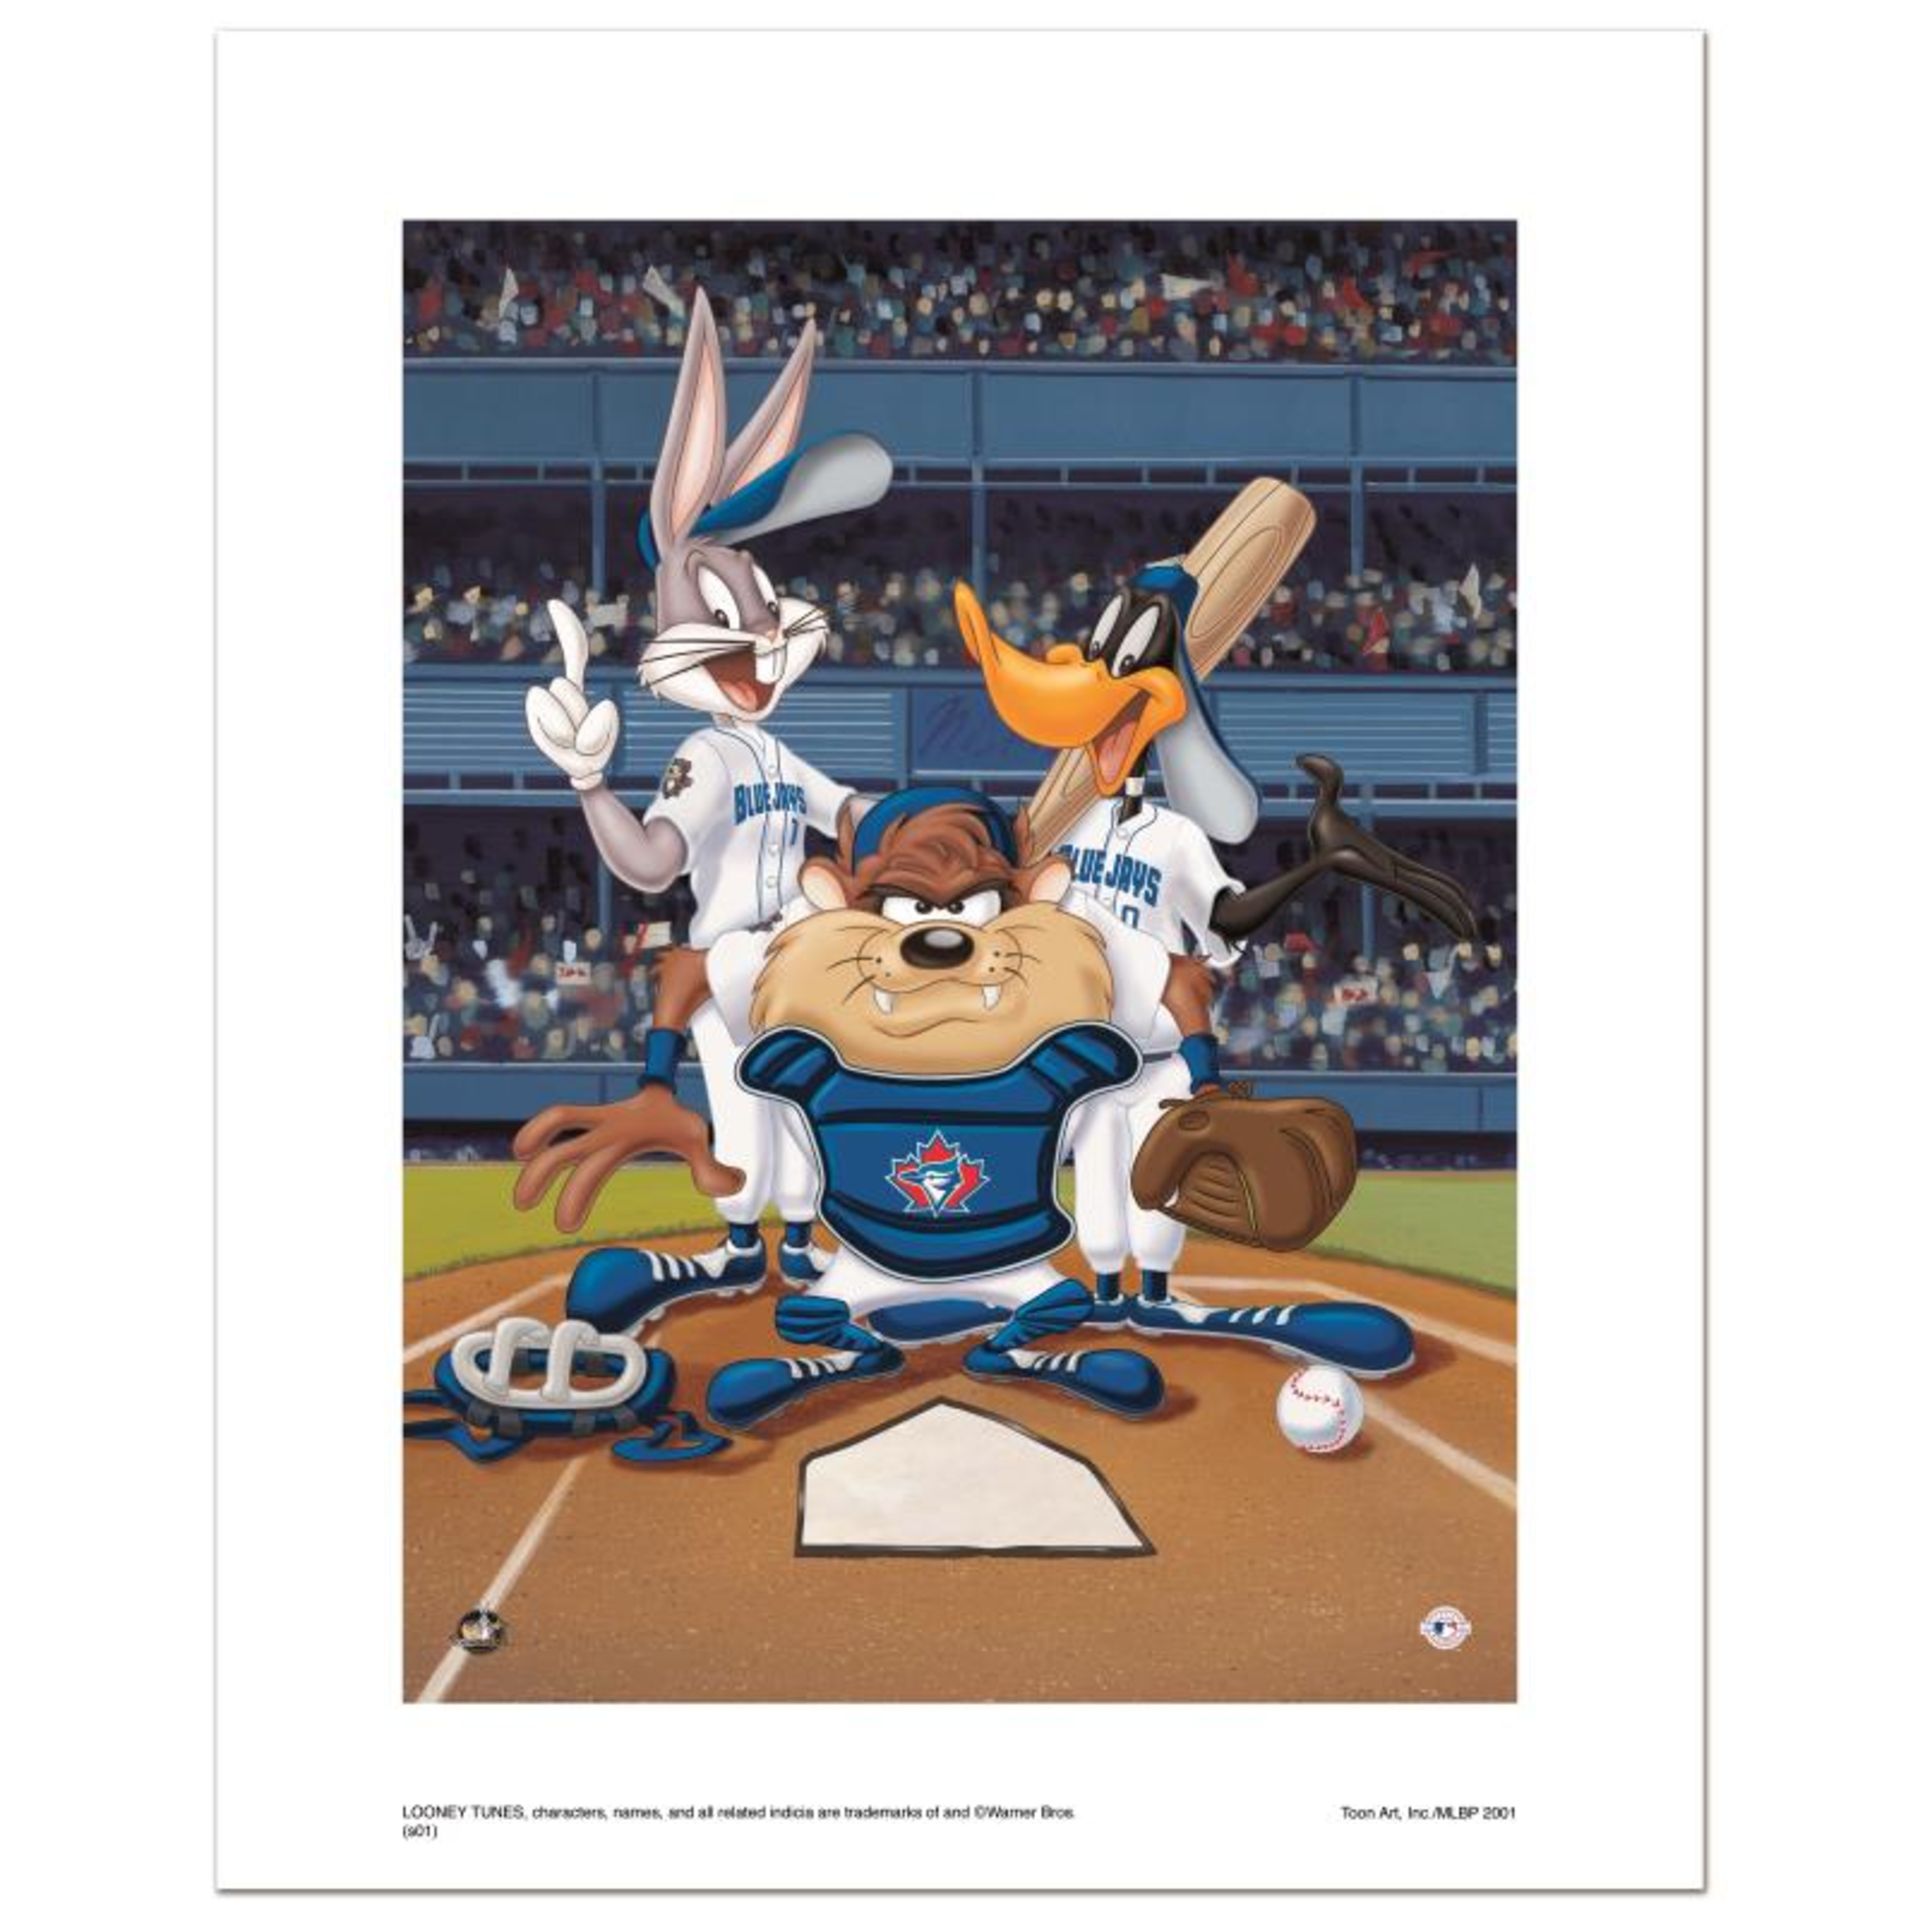 "At the Plate (Blue Jays)" Numbered Limited Edition Giclee from Warner Bros. wit